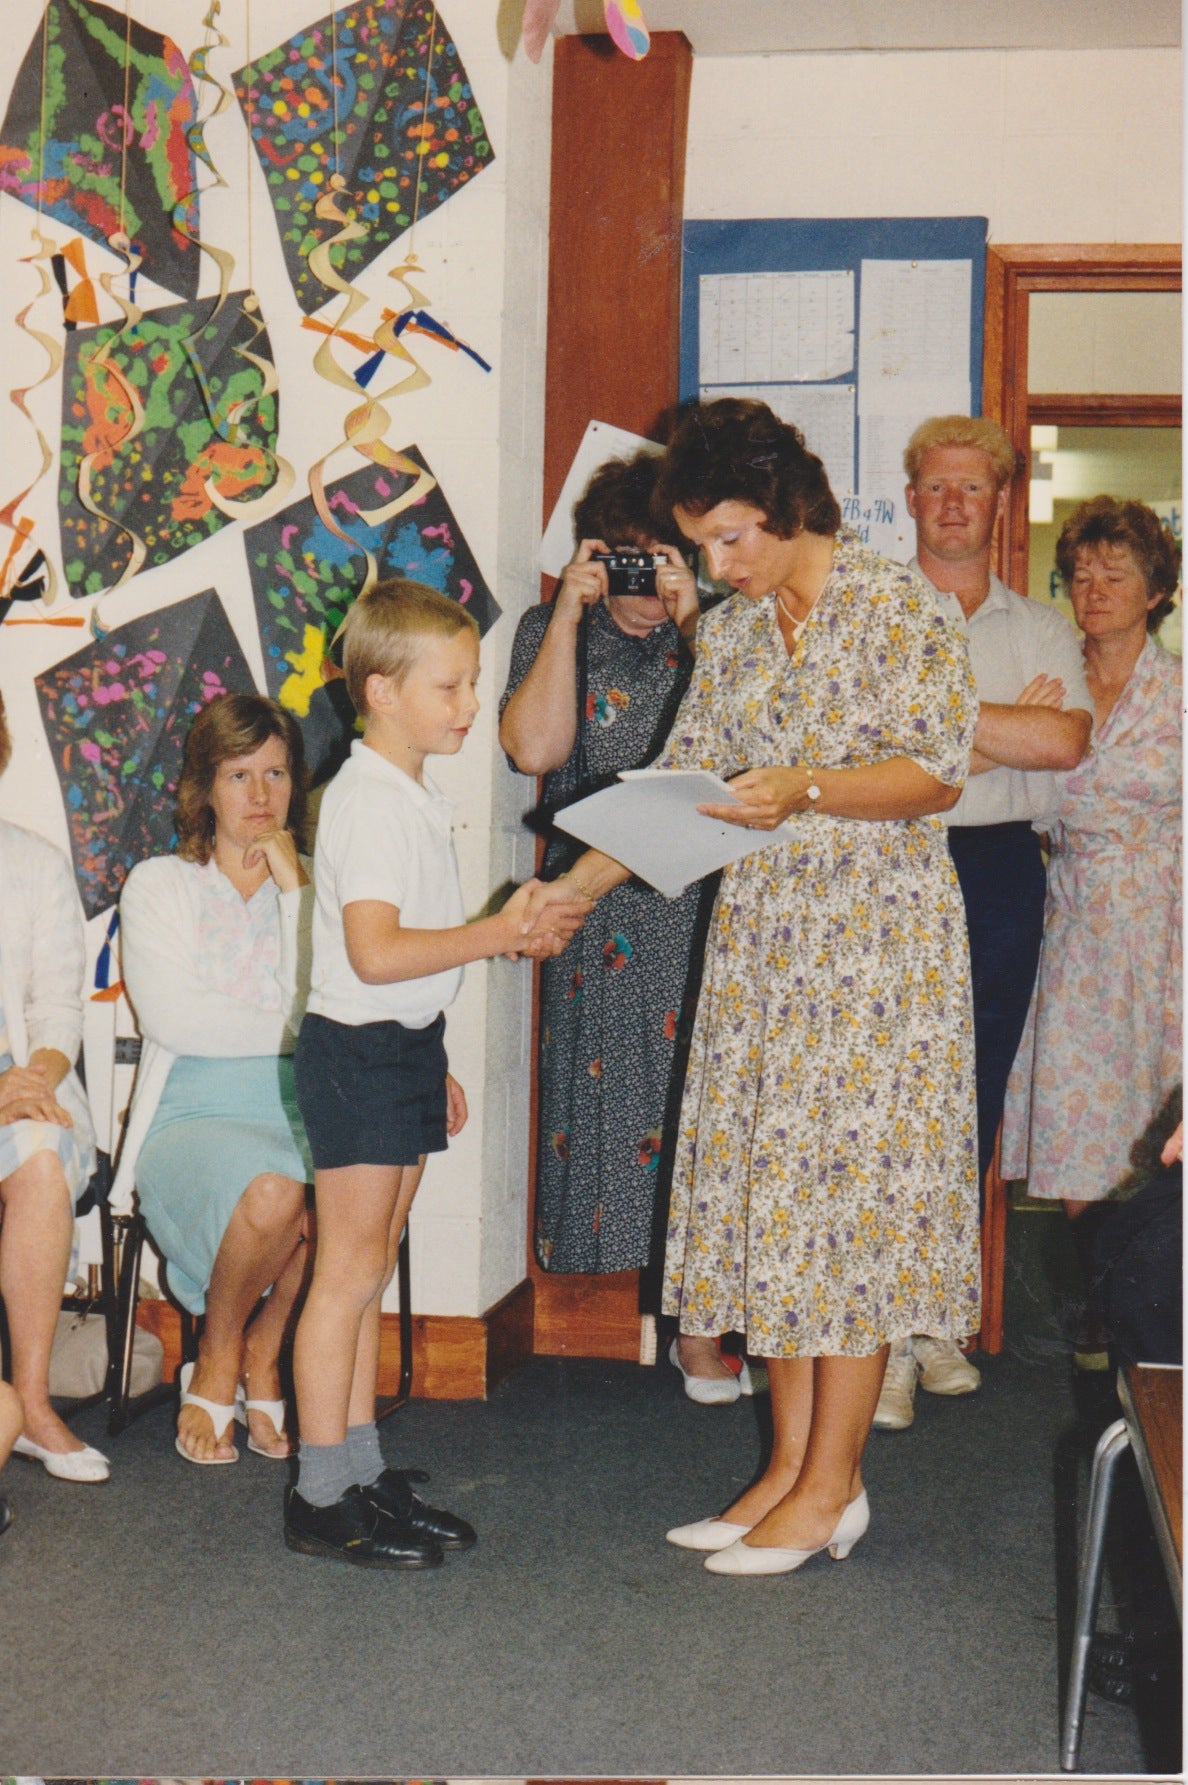 1987 The first year in Tattenhoe Lane starting with 90 children